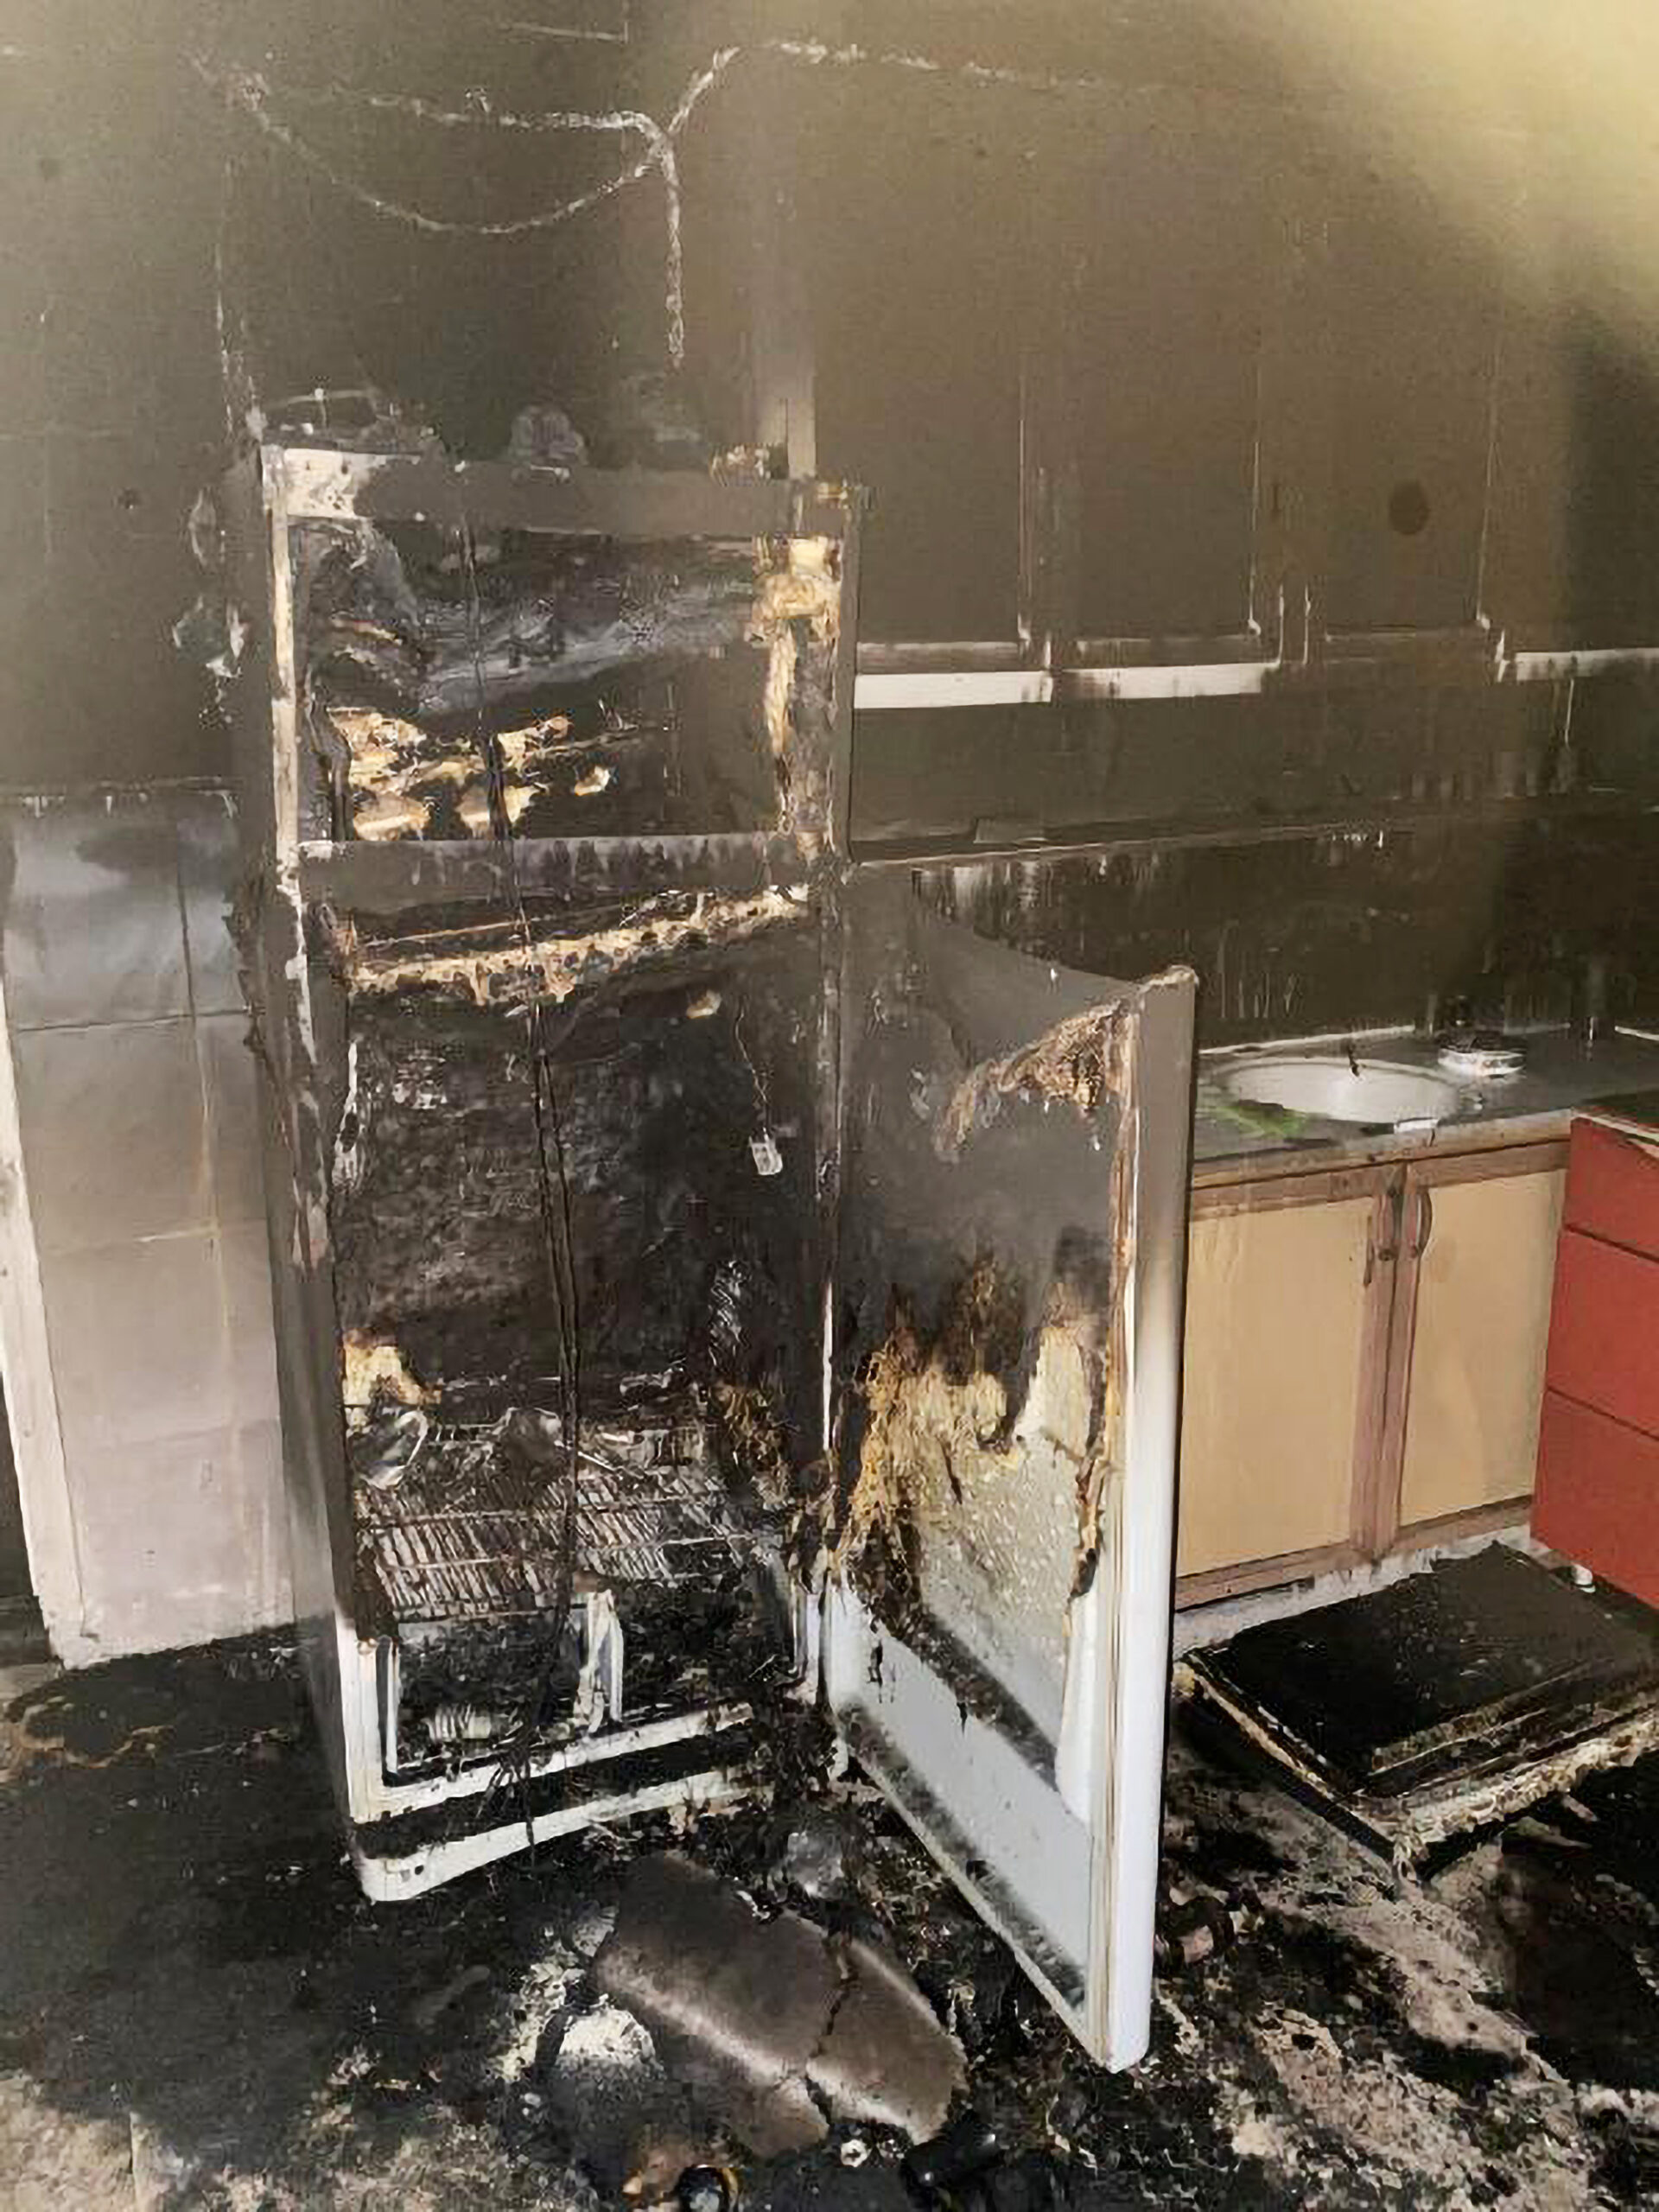 Read more about the article  Woman With Alzheimer’s Dies After Mistaking Fridge For Stove And Burning Wood In It